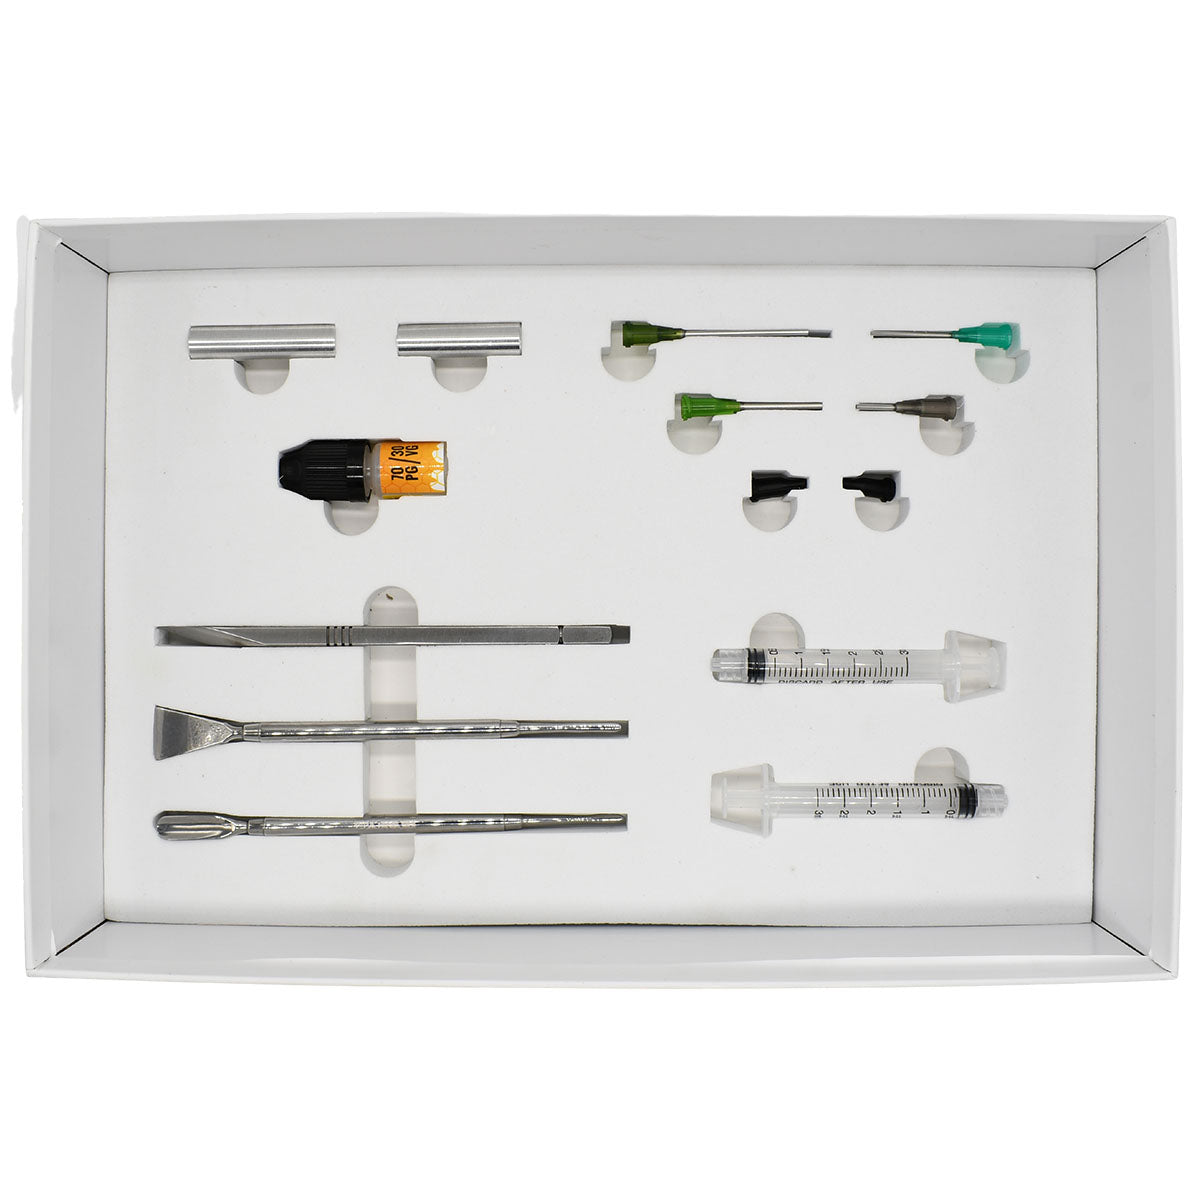 CartDub COMPETE Kit to Open 510 Cartridges and Remove Oil